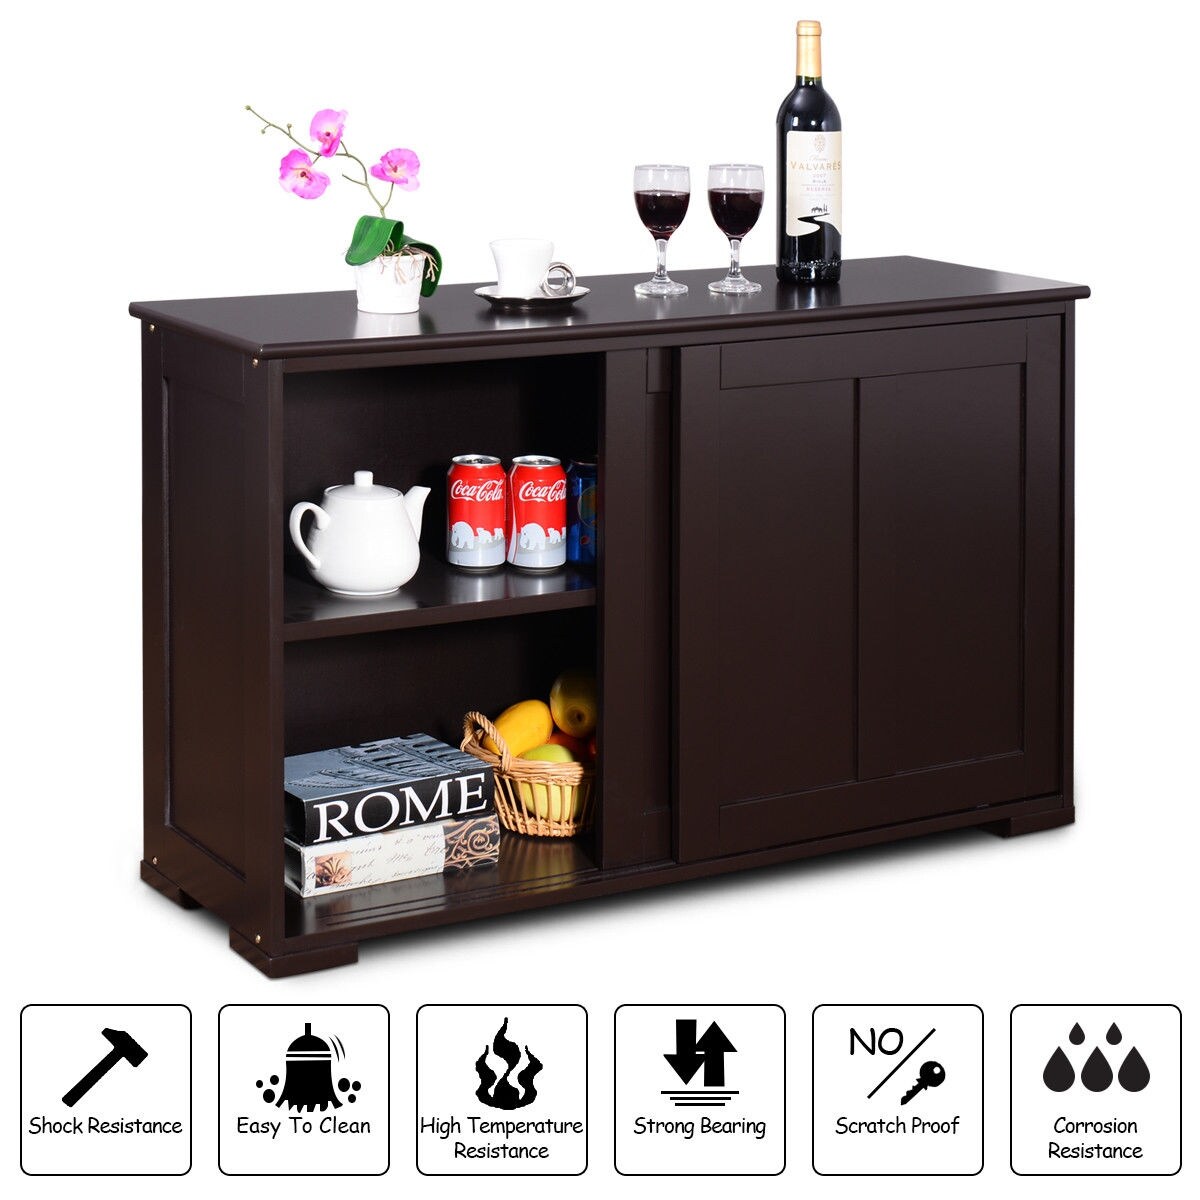 https://ak1.ostkcdn.com/images/products/is/images/direct/ec946517a272c72fd8e460ad75c14e13448427ab/Costway-Kitchen-Storage-Cabinet-Sideboard-Buffet-Cupboard-Wood-Sliding.jpg